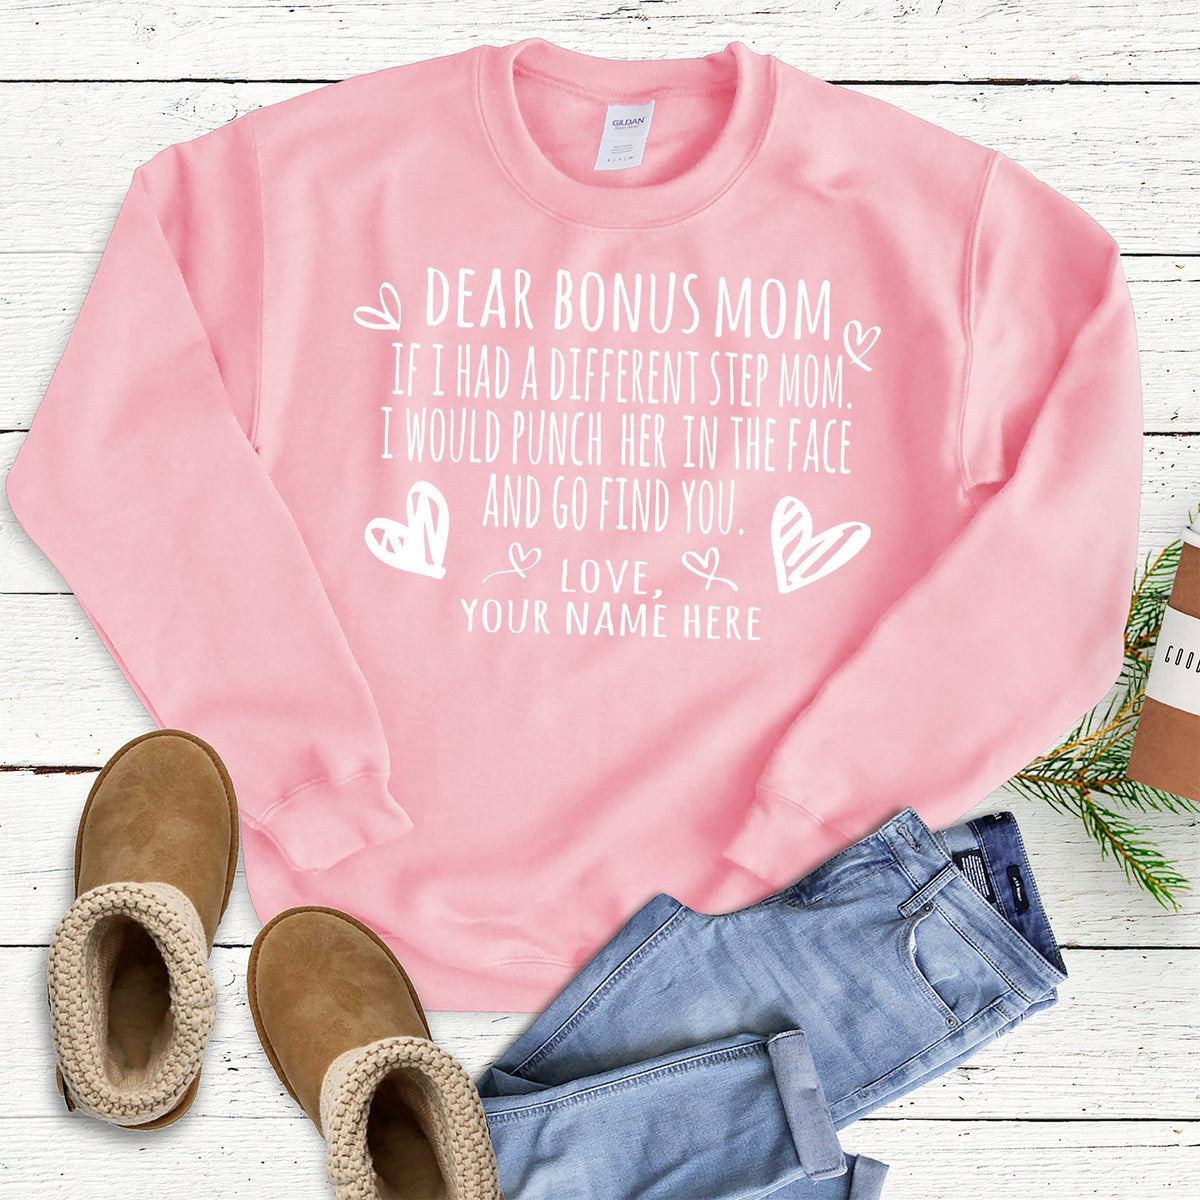 If I Had A Different Step Mom I Would Punch Her in The Face - Long Sleeve Heavy Crewneck Sweatshirt